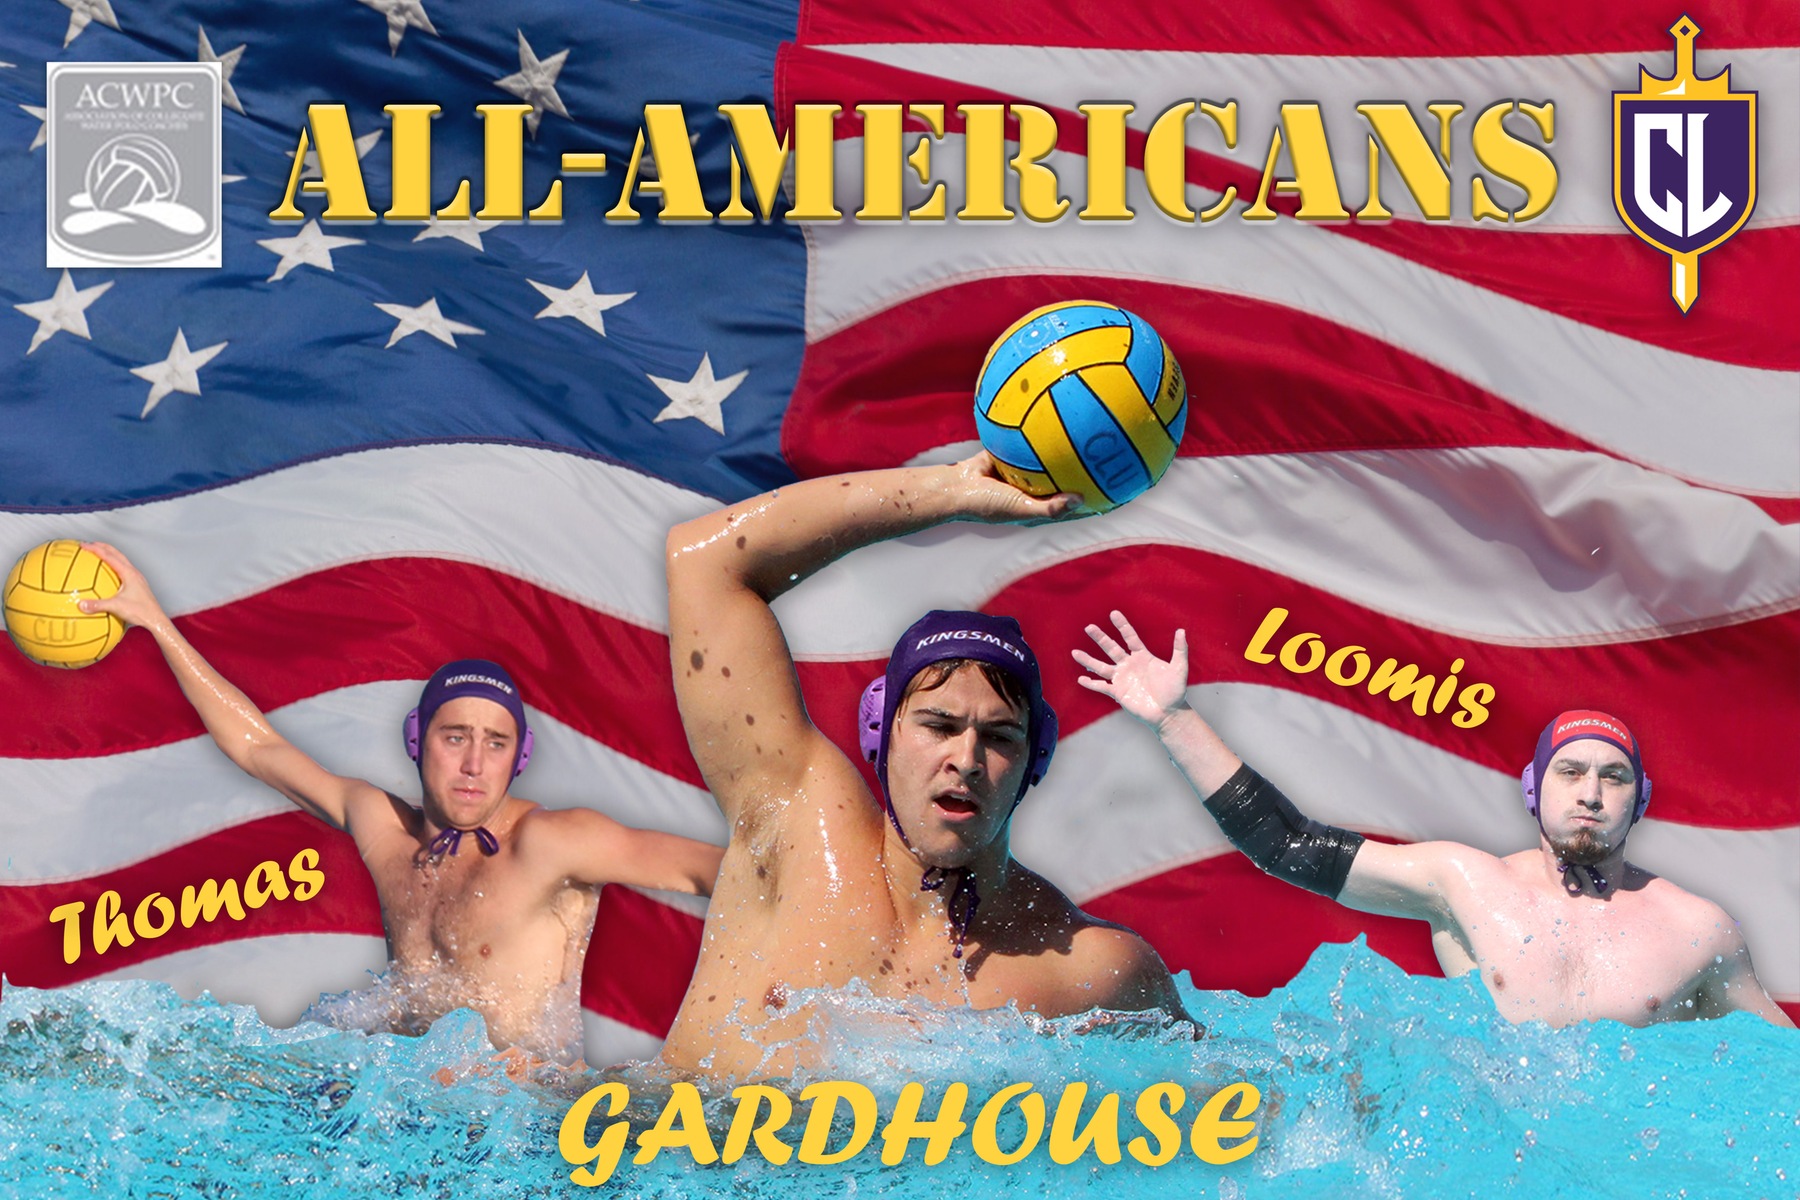 Gardhouse, Loomis and Thomas Named ACWPC All-Americans